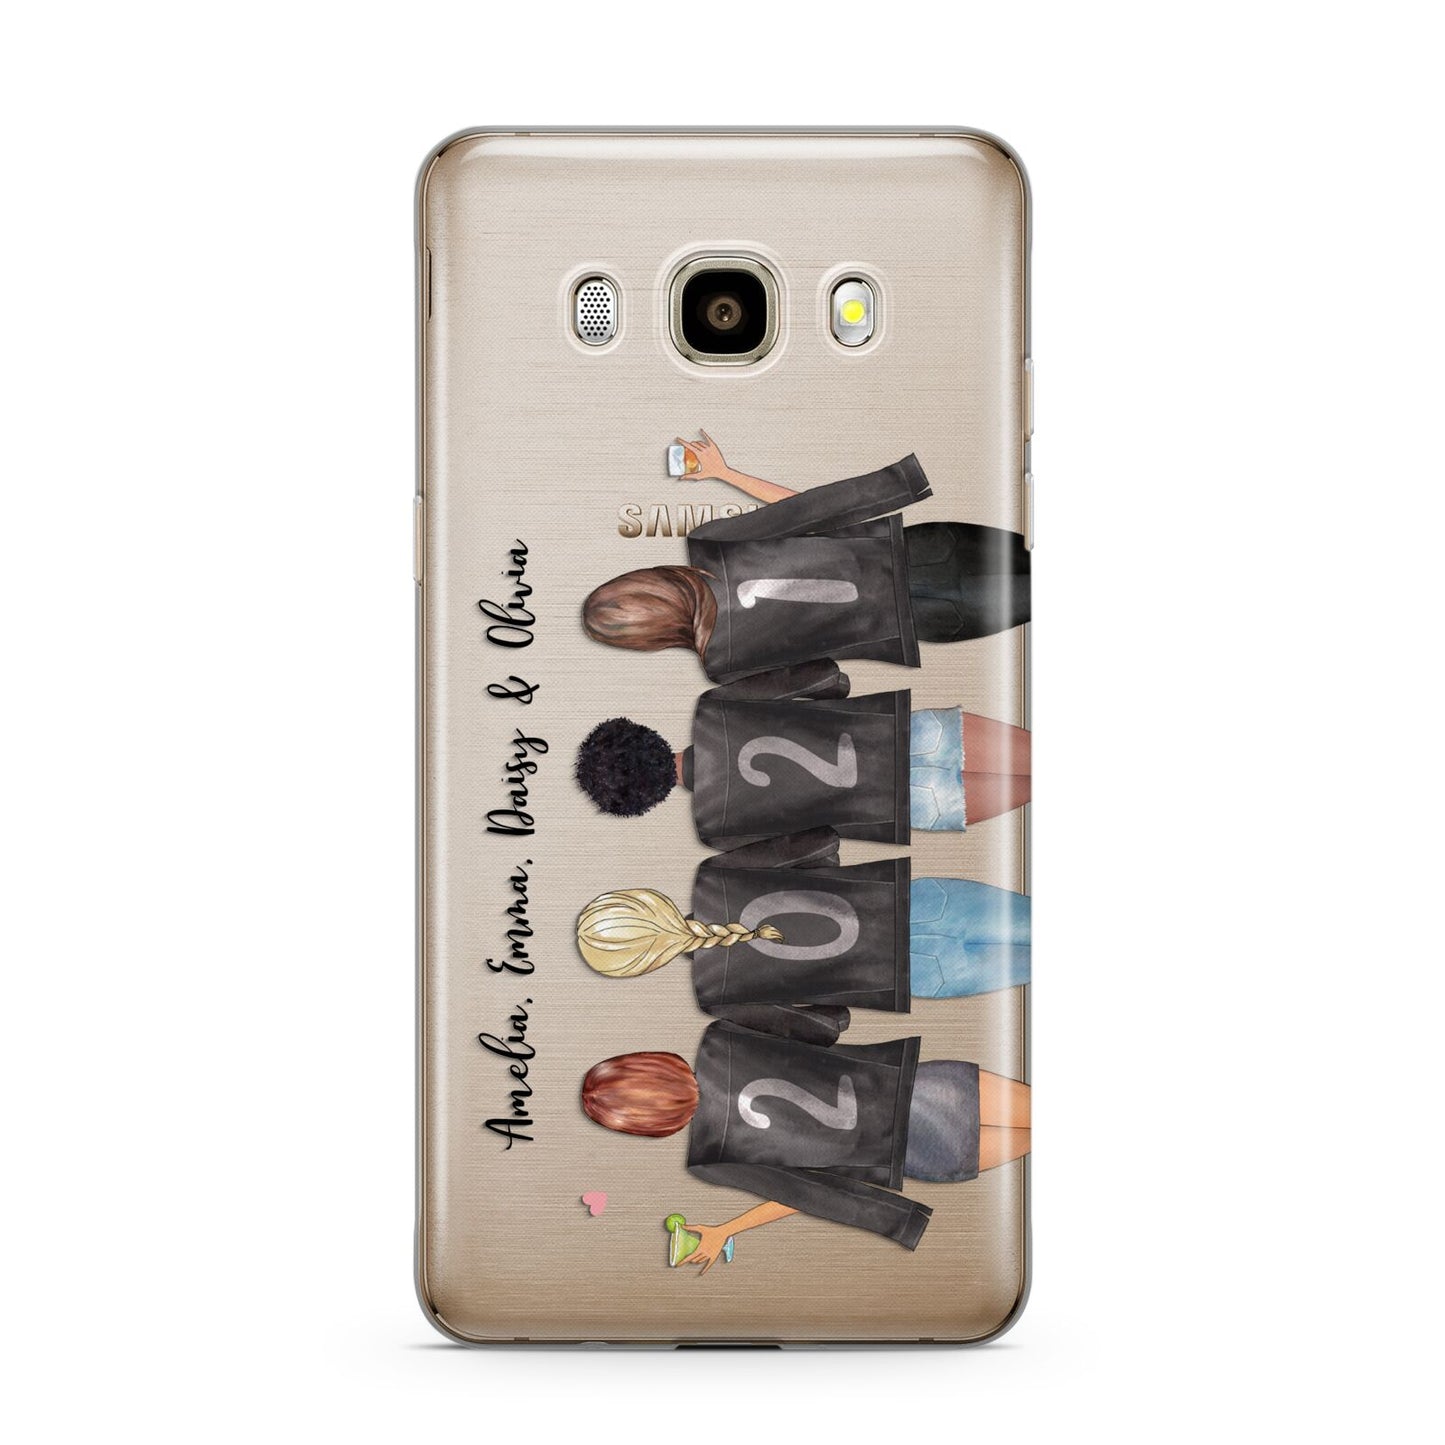 4 Best Friends with Names Samsung Galaxy J7 2016 Case on gold phone